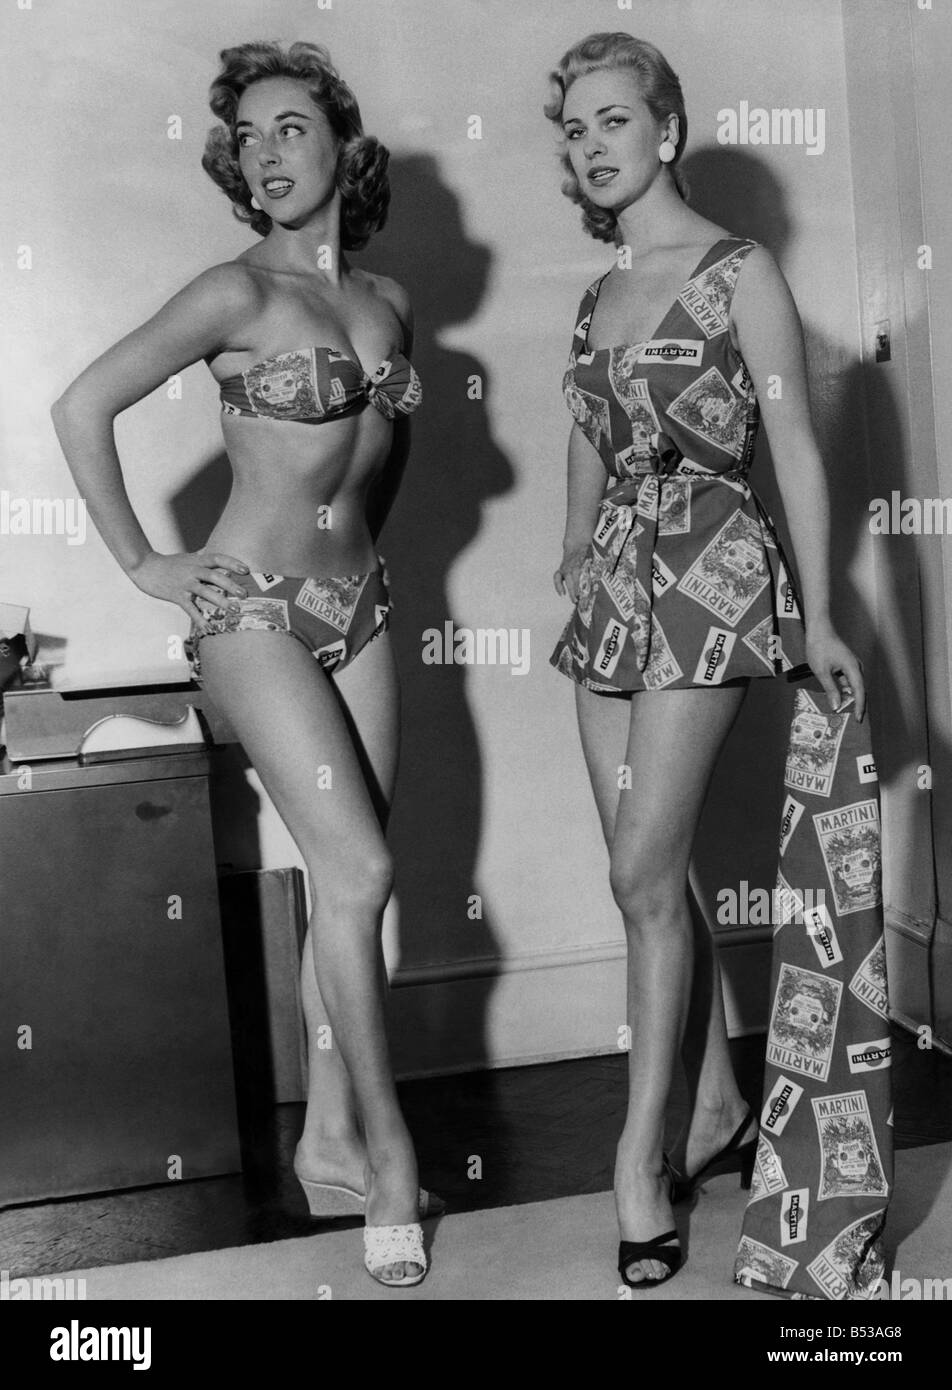 Clothing Fashion Beachwear. Model number 1271 bikini and play jacket with skirt in cotton martini print. The two models show the complete outfit that can be worn by one bather. August 1956 P017969 Stock Photo